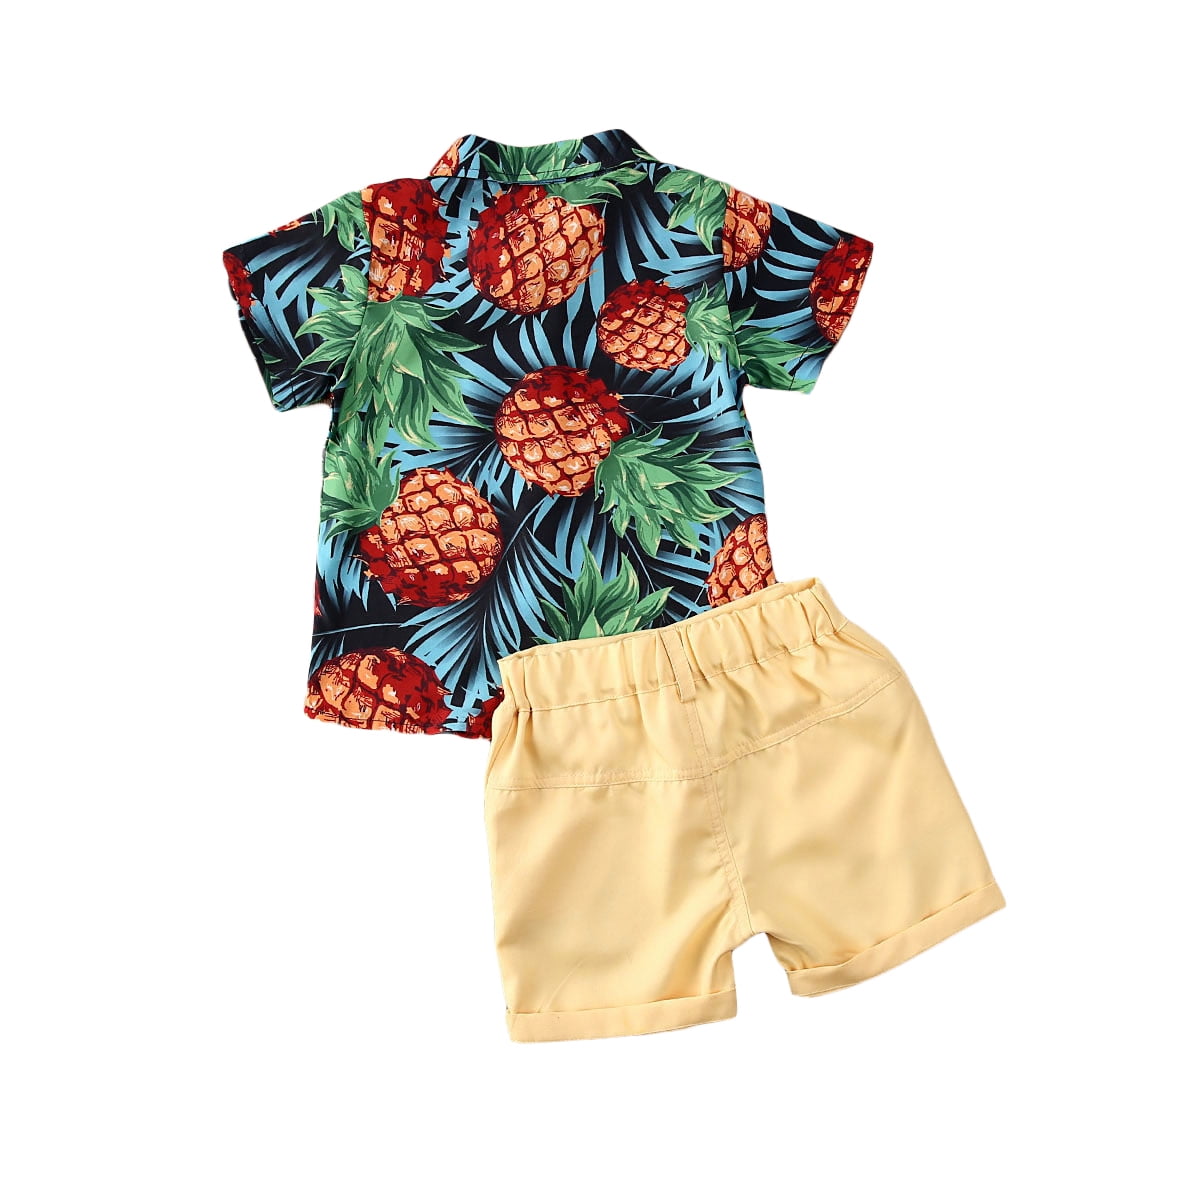 NWT Gymboree California Dreamers Baby boy Pineapple Shirt Shorts Outfit 6-12 M 